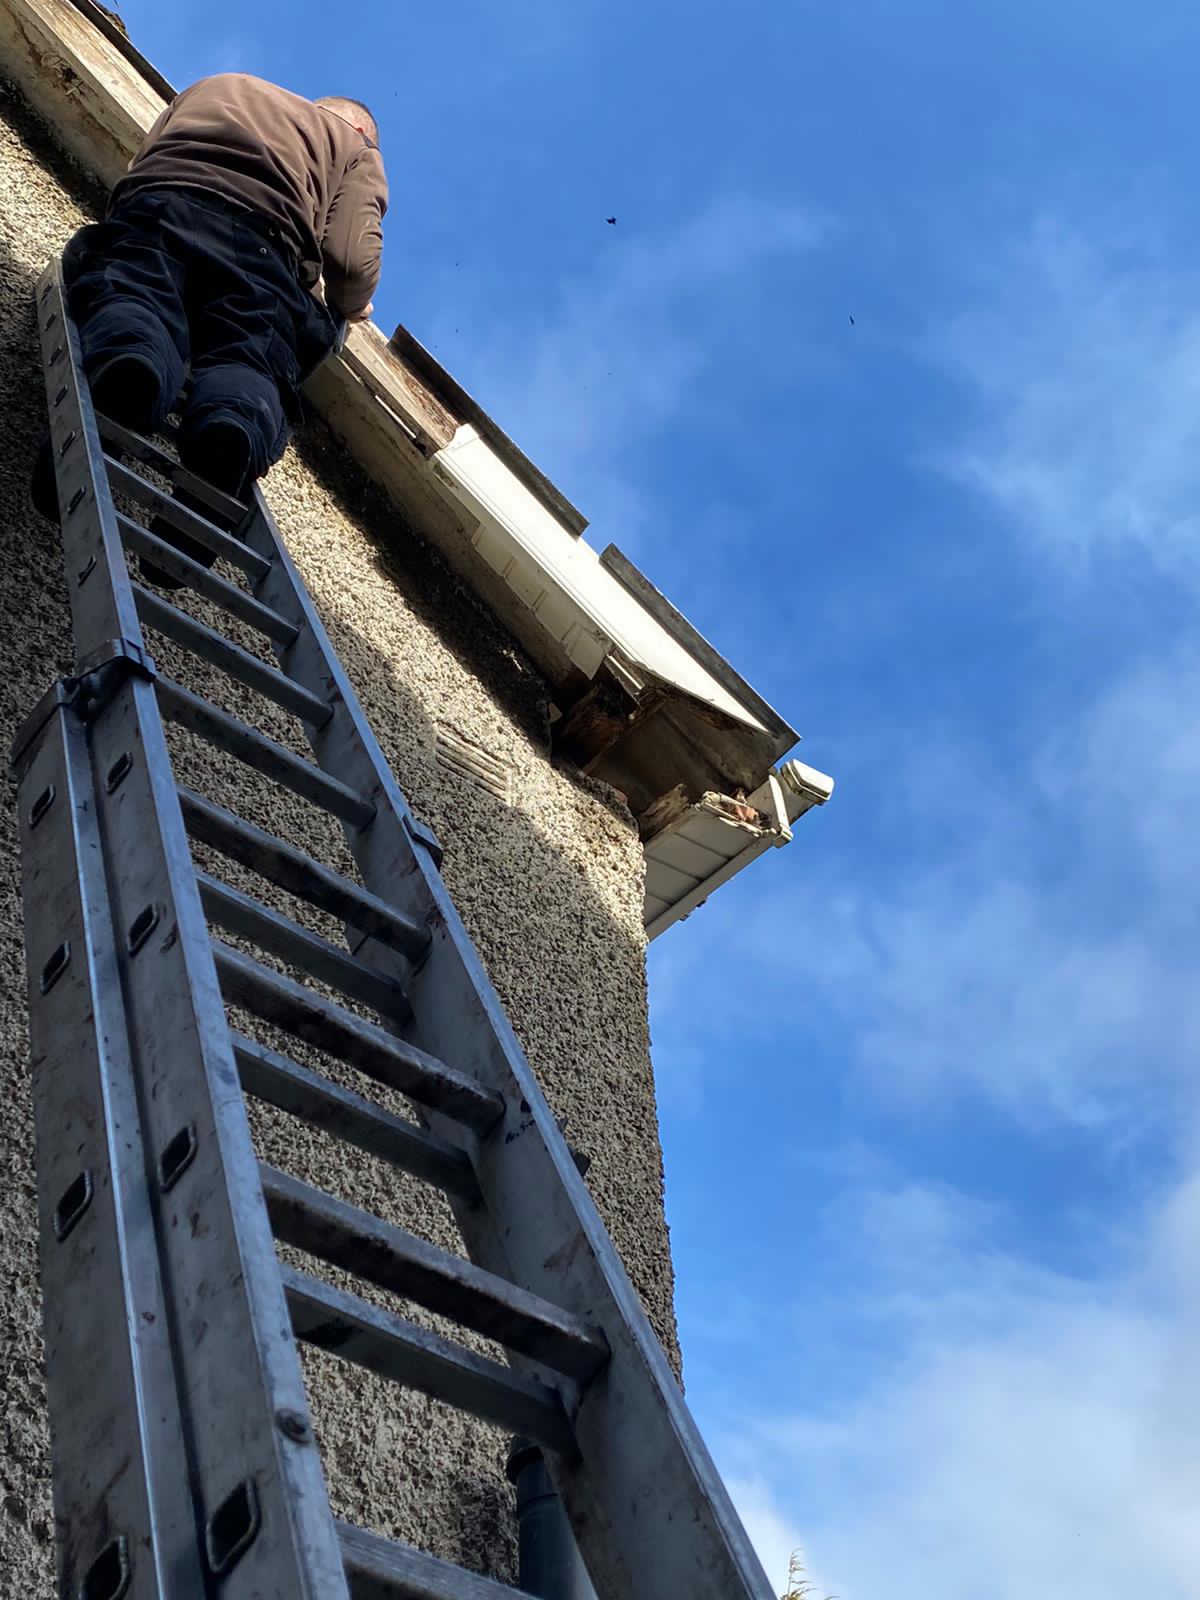 Will you clean up the debris and dispose of it properly after completing the roofing work in Dublin?